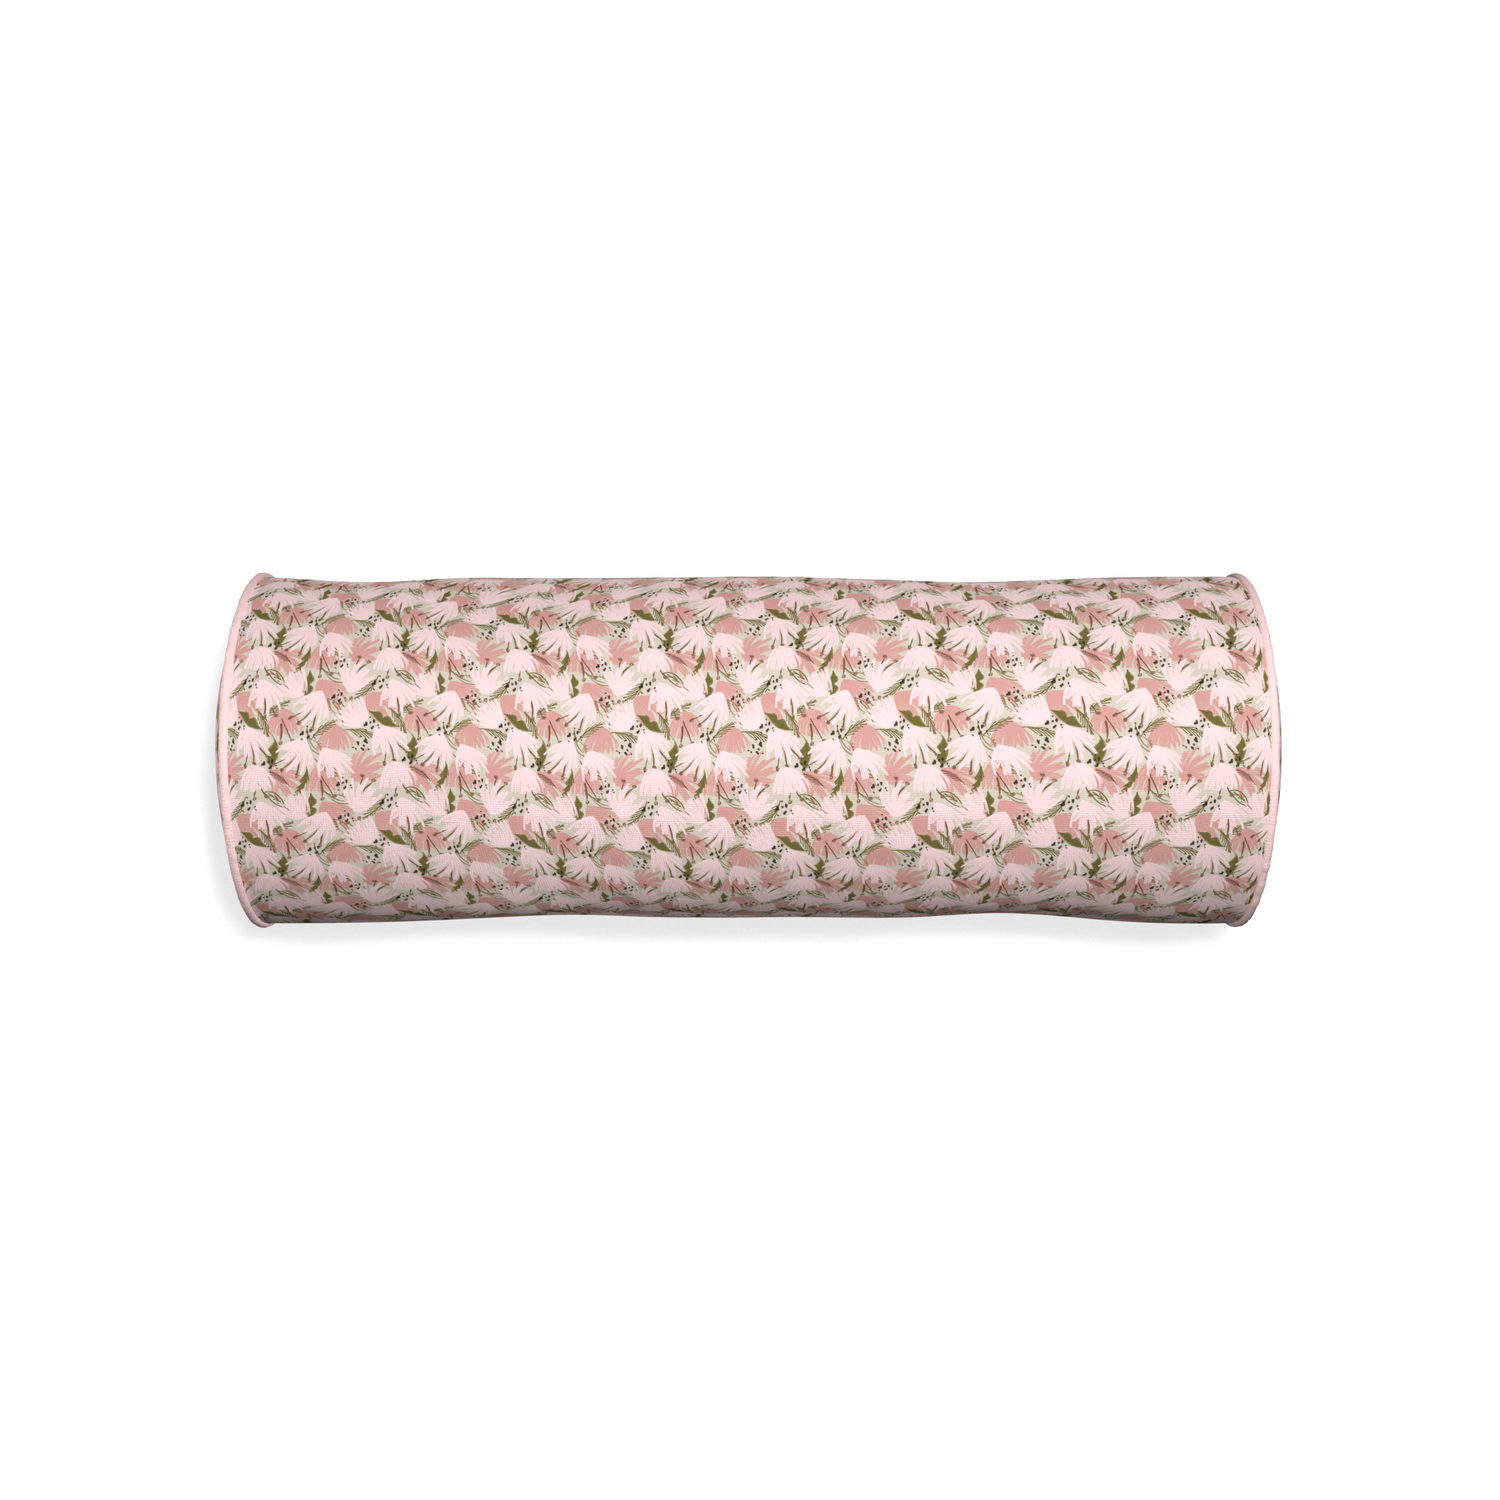 Bolster eden pink custom pink floralpillow with petal piping on white background